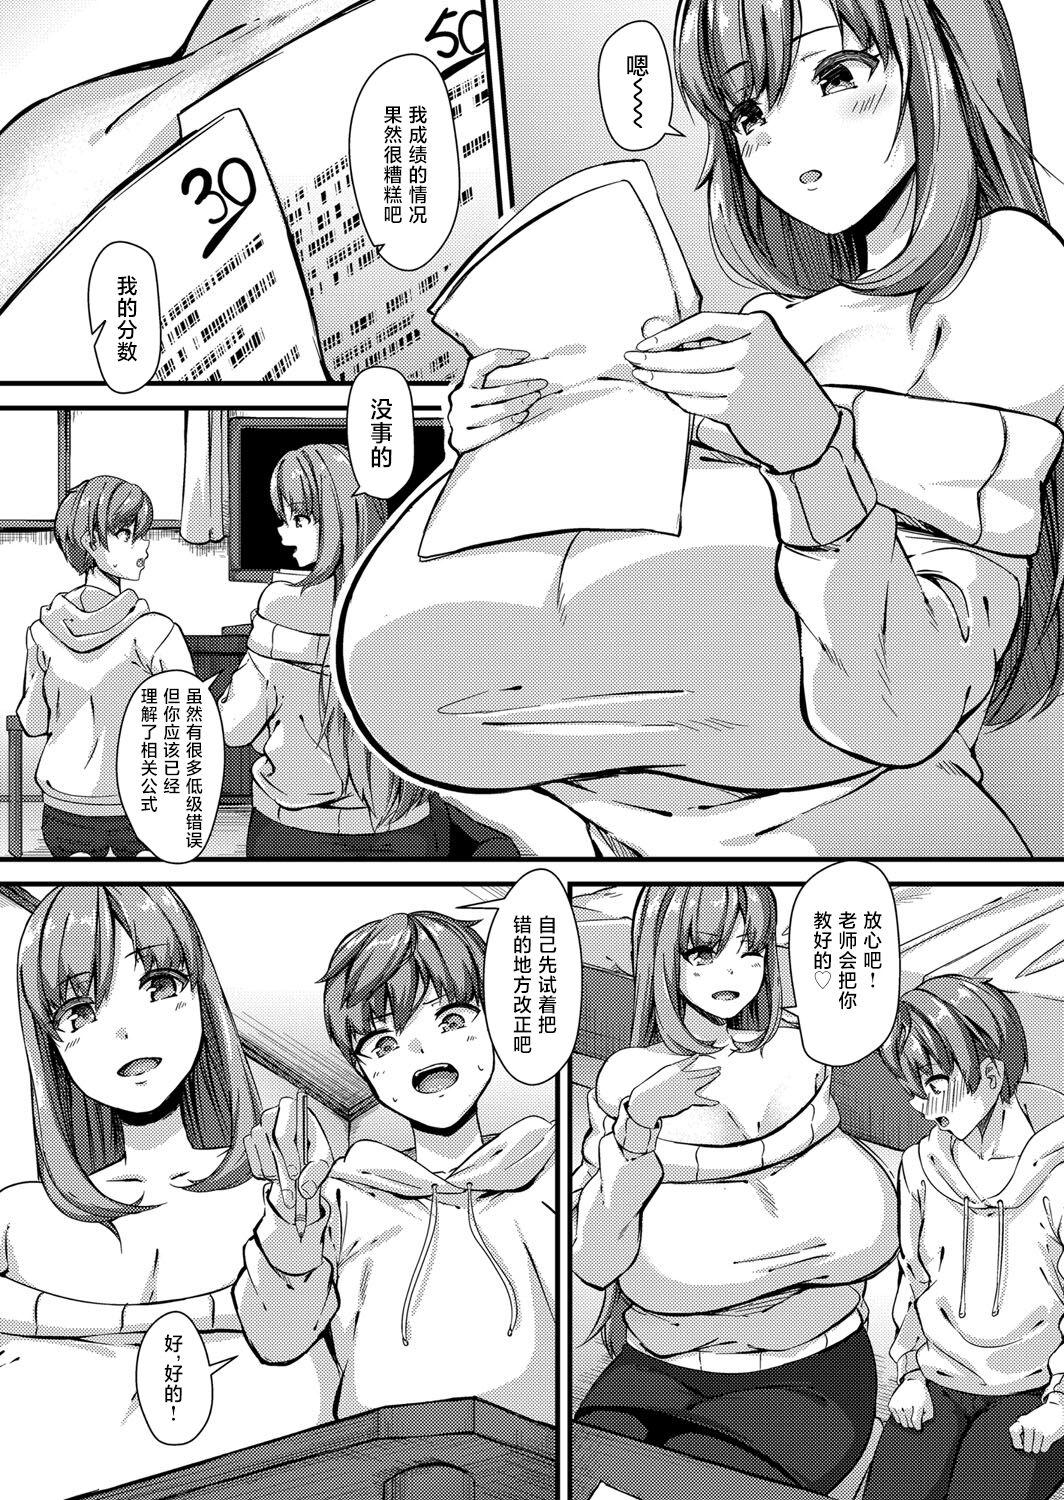 Pigtails 爆乳家庭教师 Threesome - Page 2